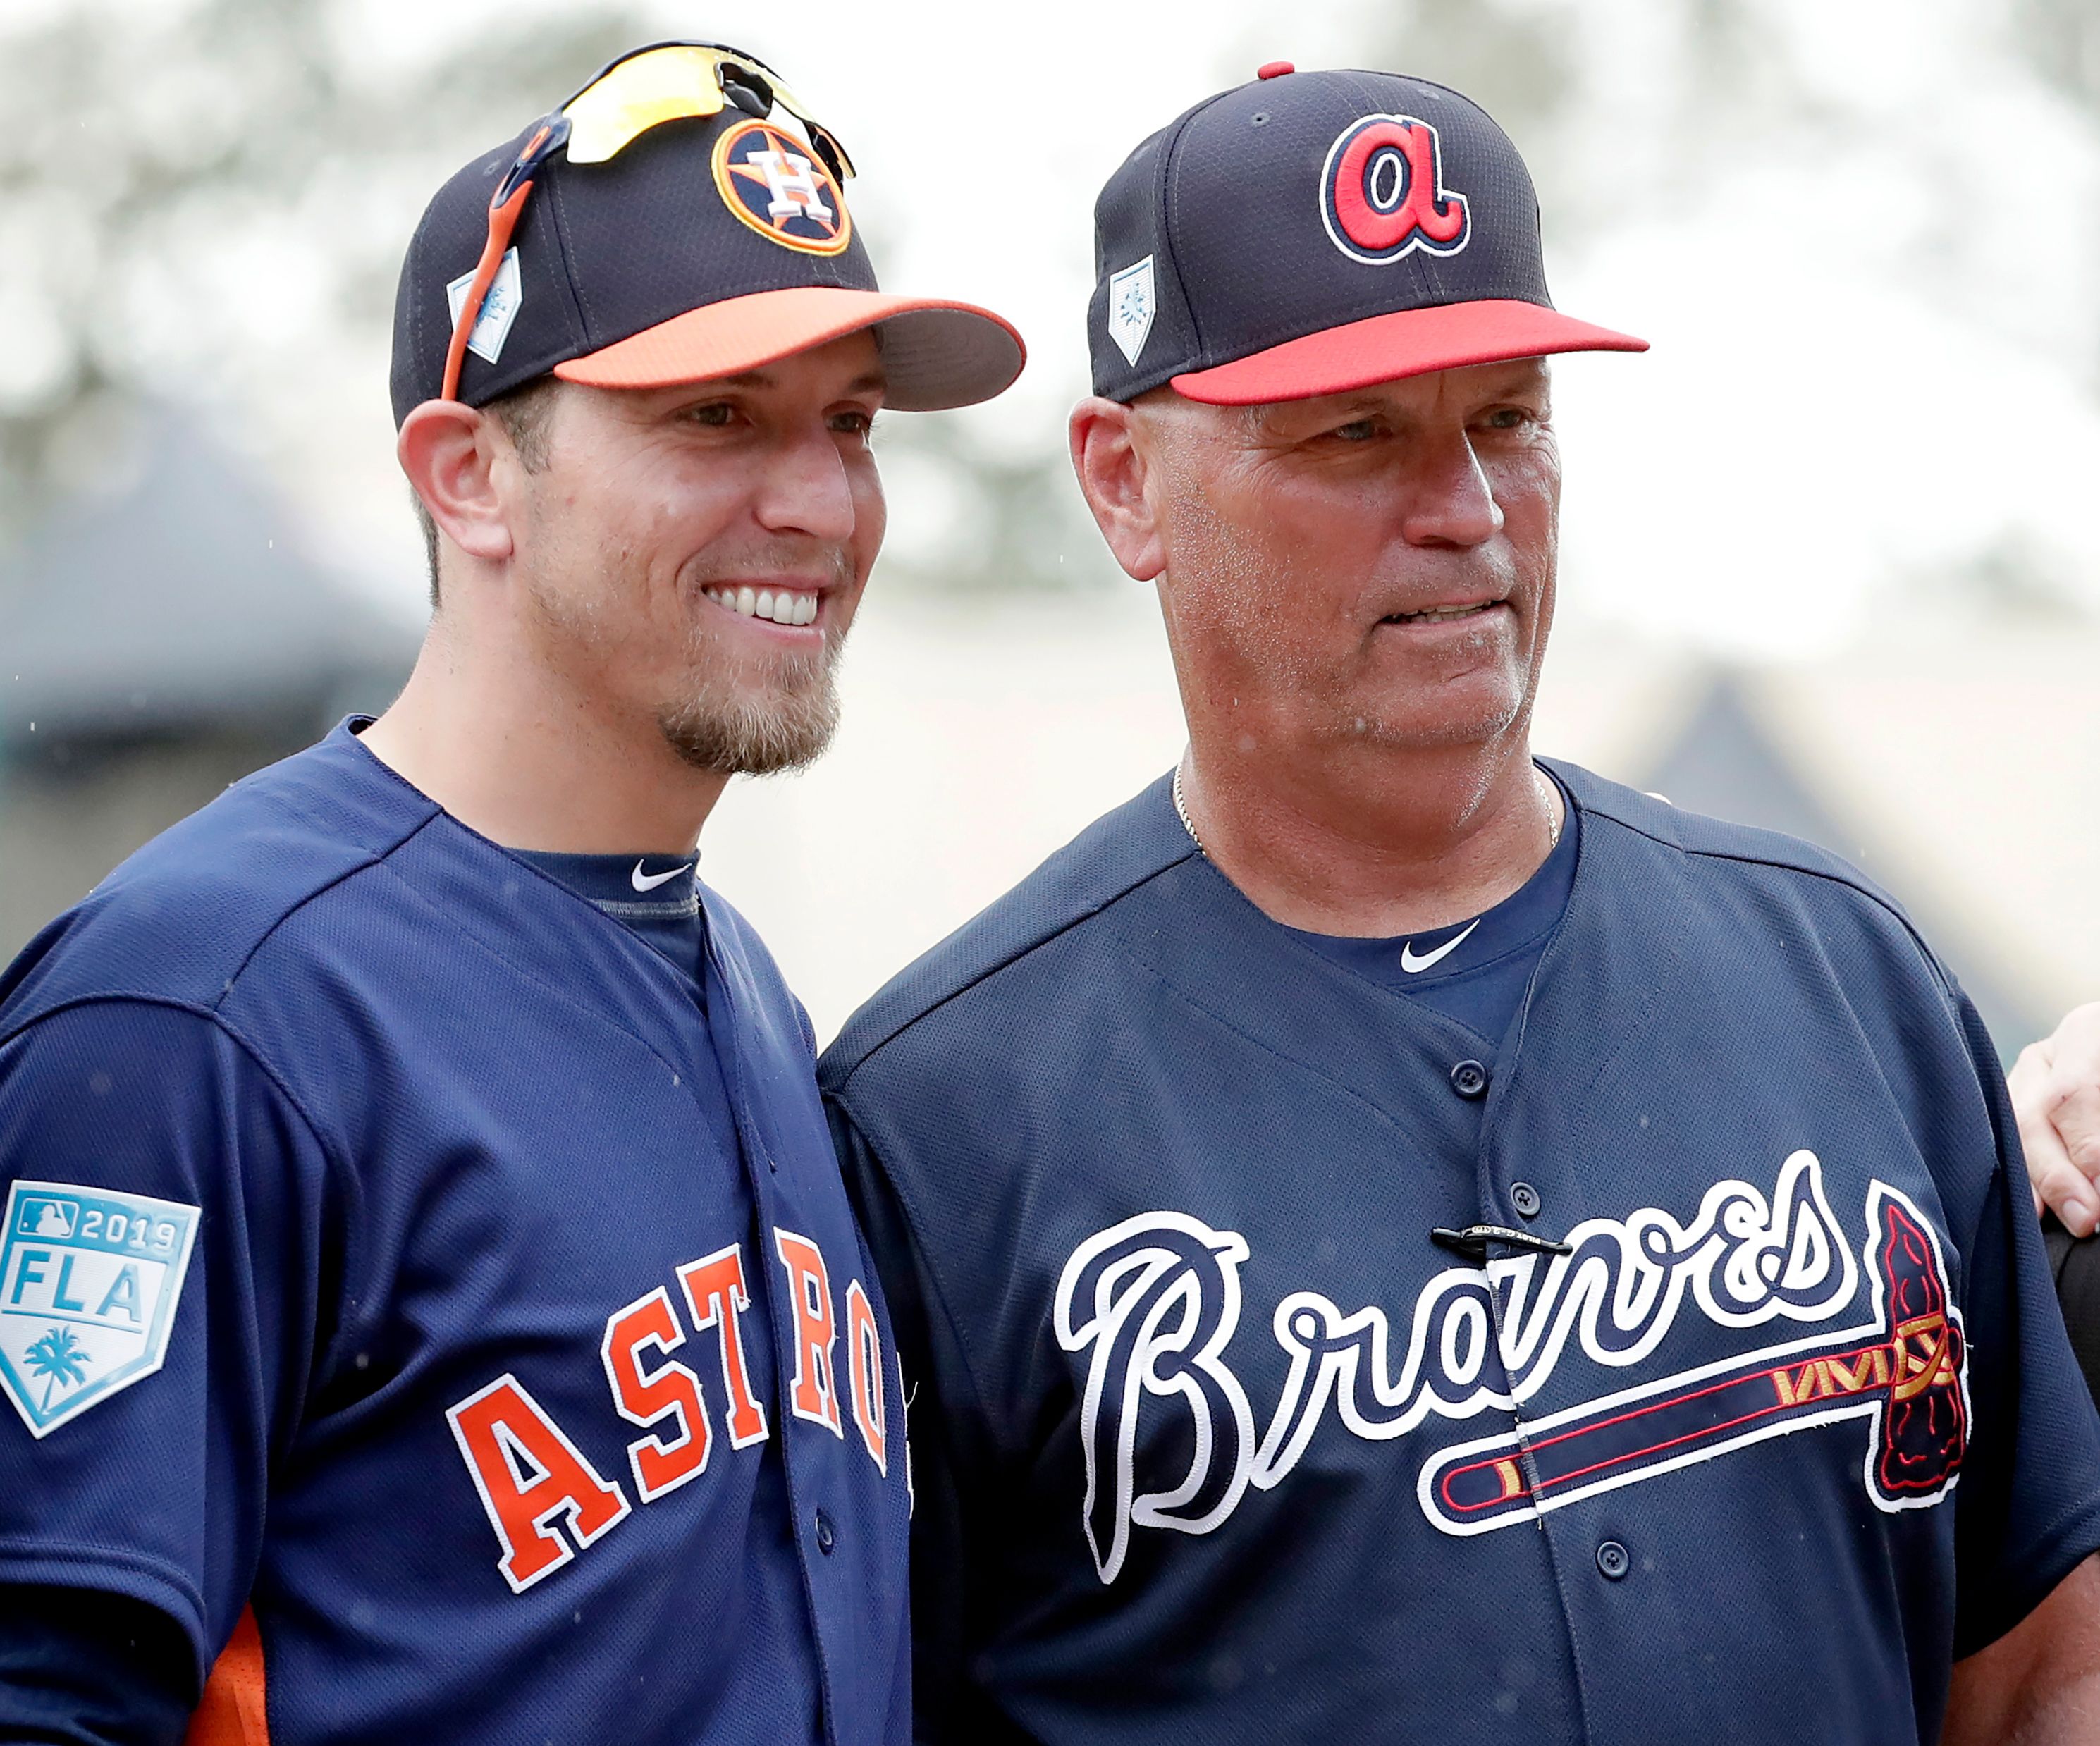 Braves vs Astros: 2021 World Series pits father versus son